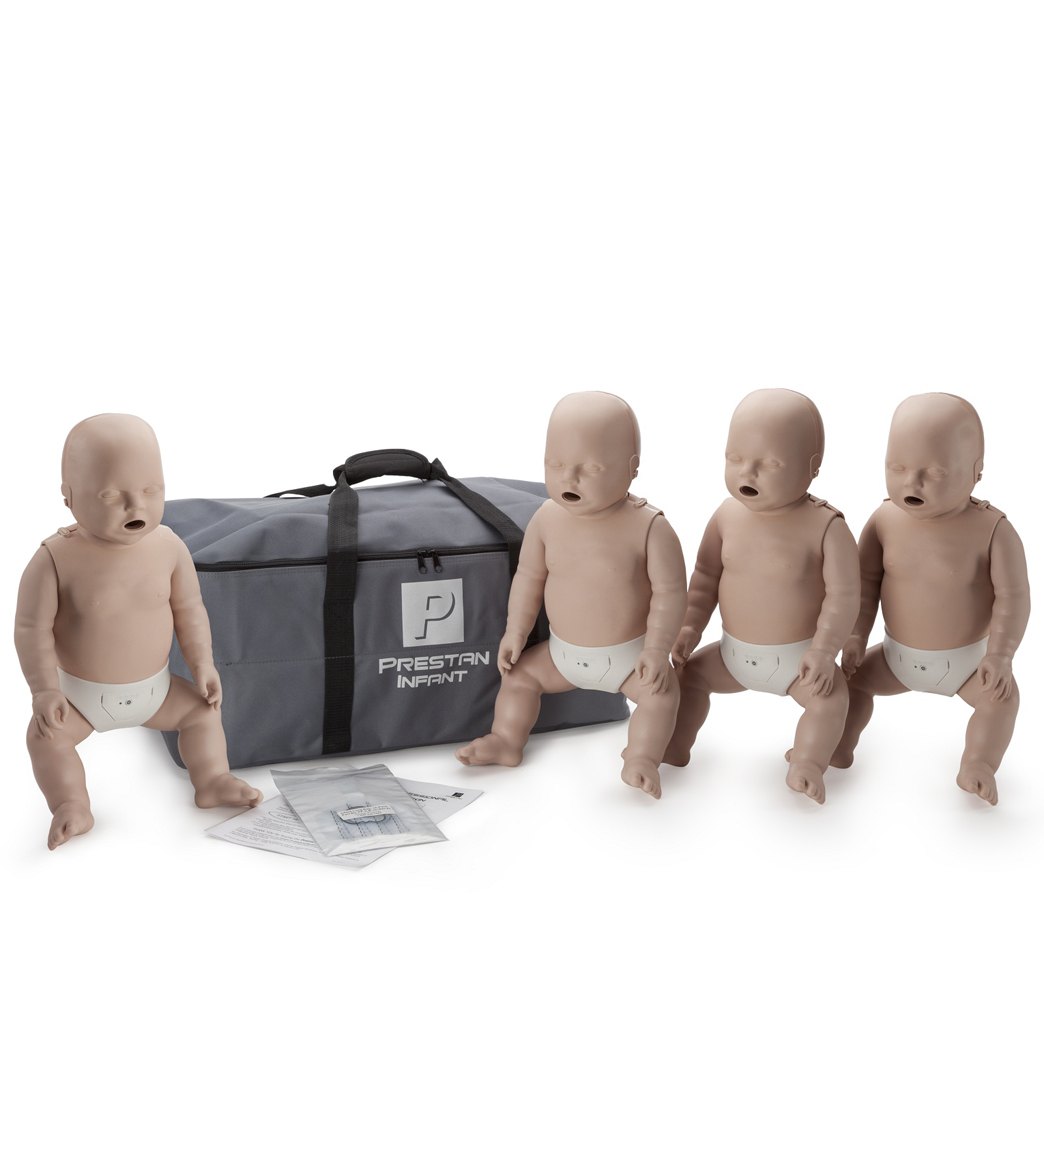 Prestan Professional Infant CPR-AED Training Manikins 4 Pack & Kit